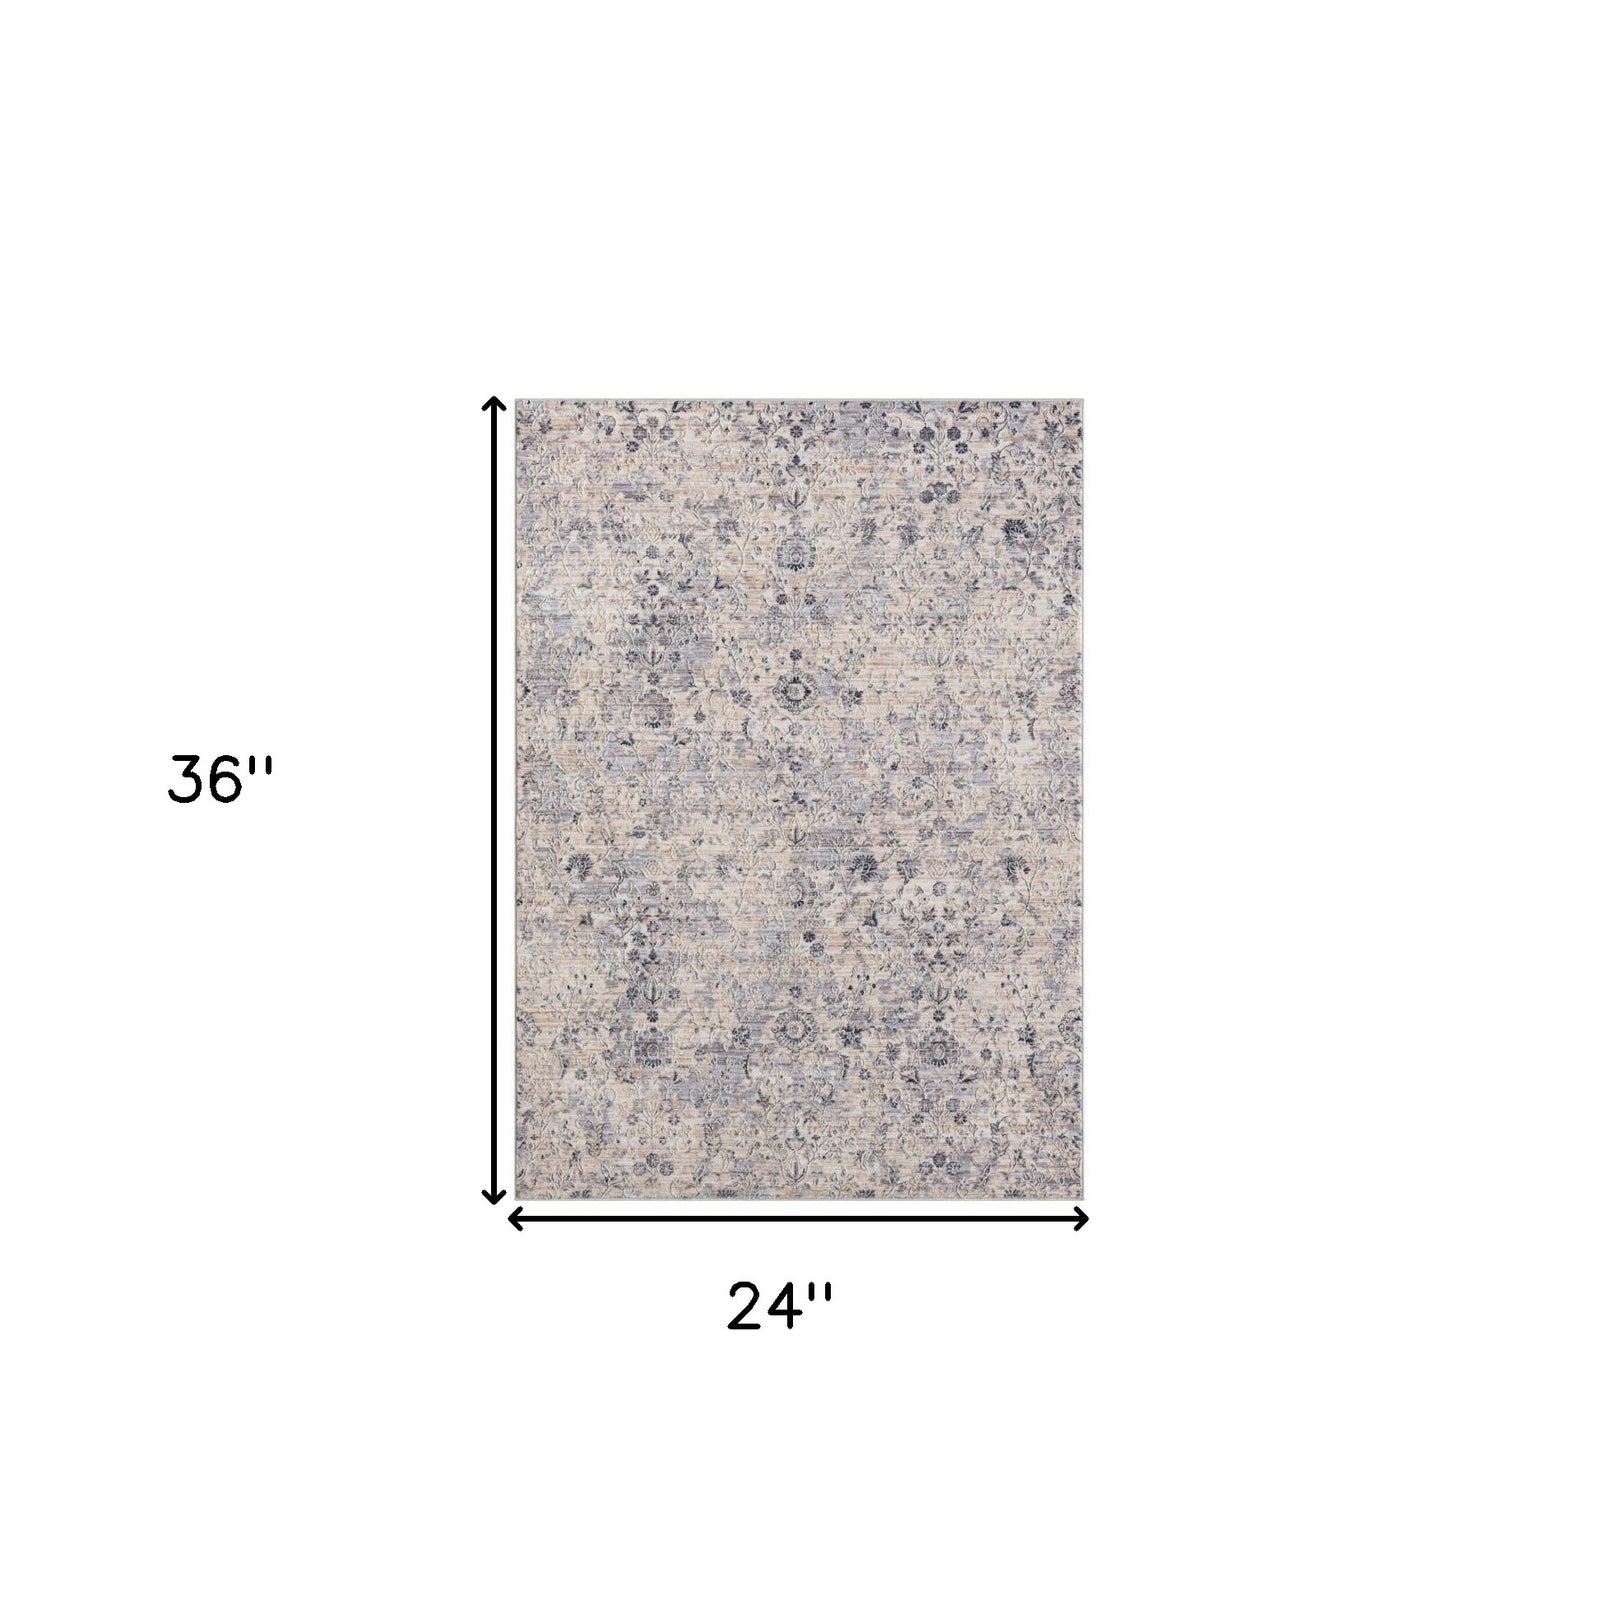 2' X 3' Gray Floral Area Rug